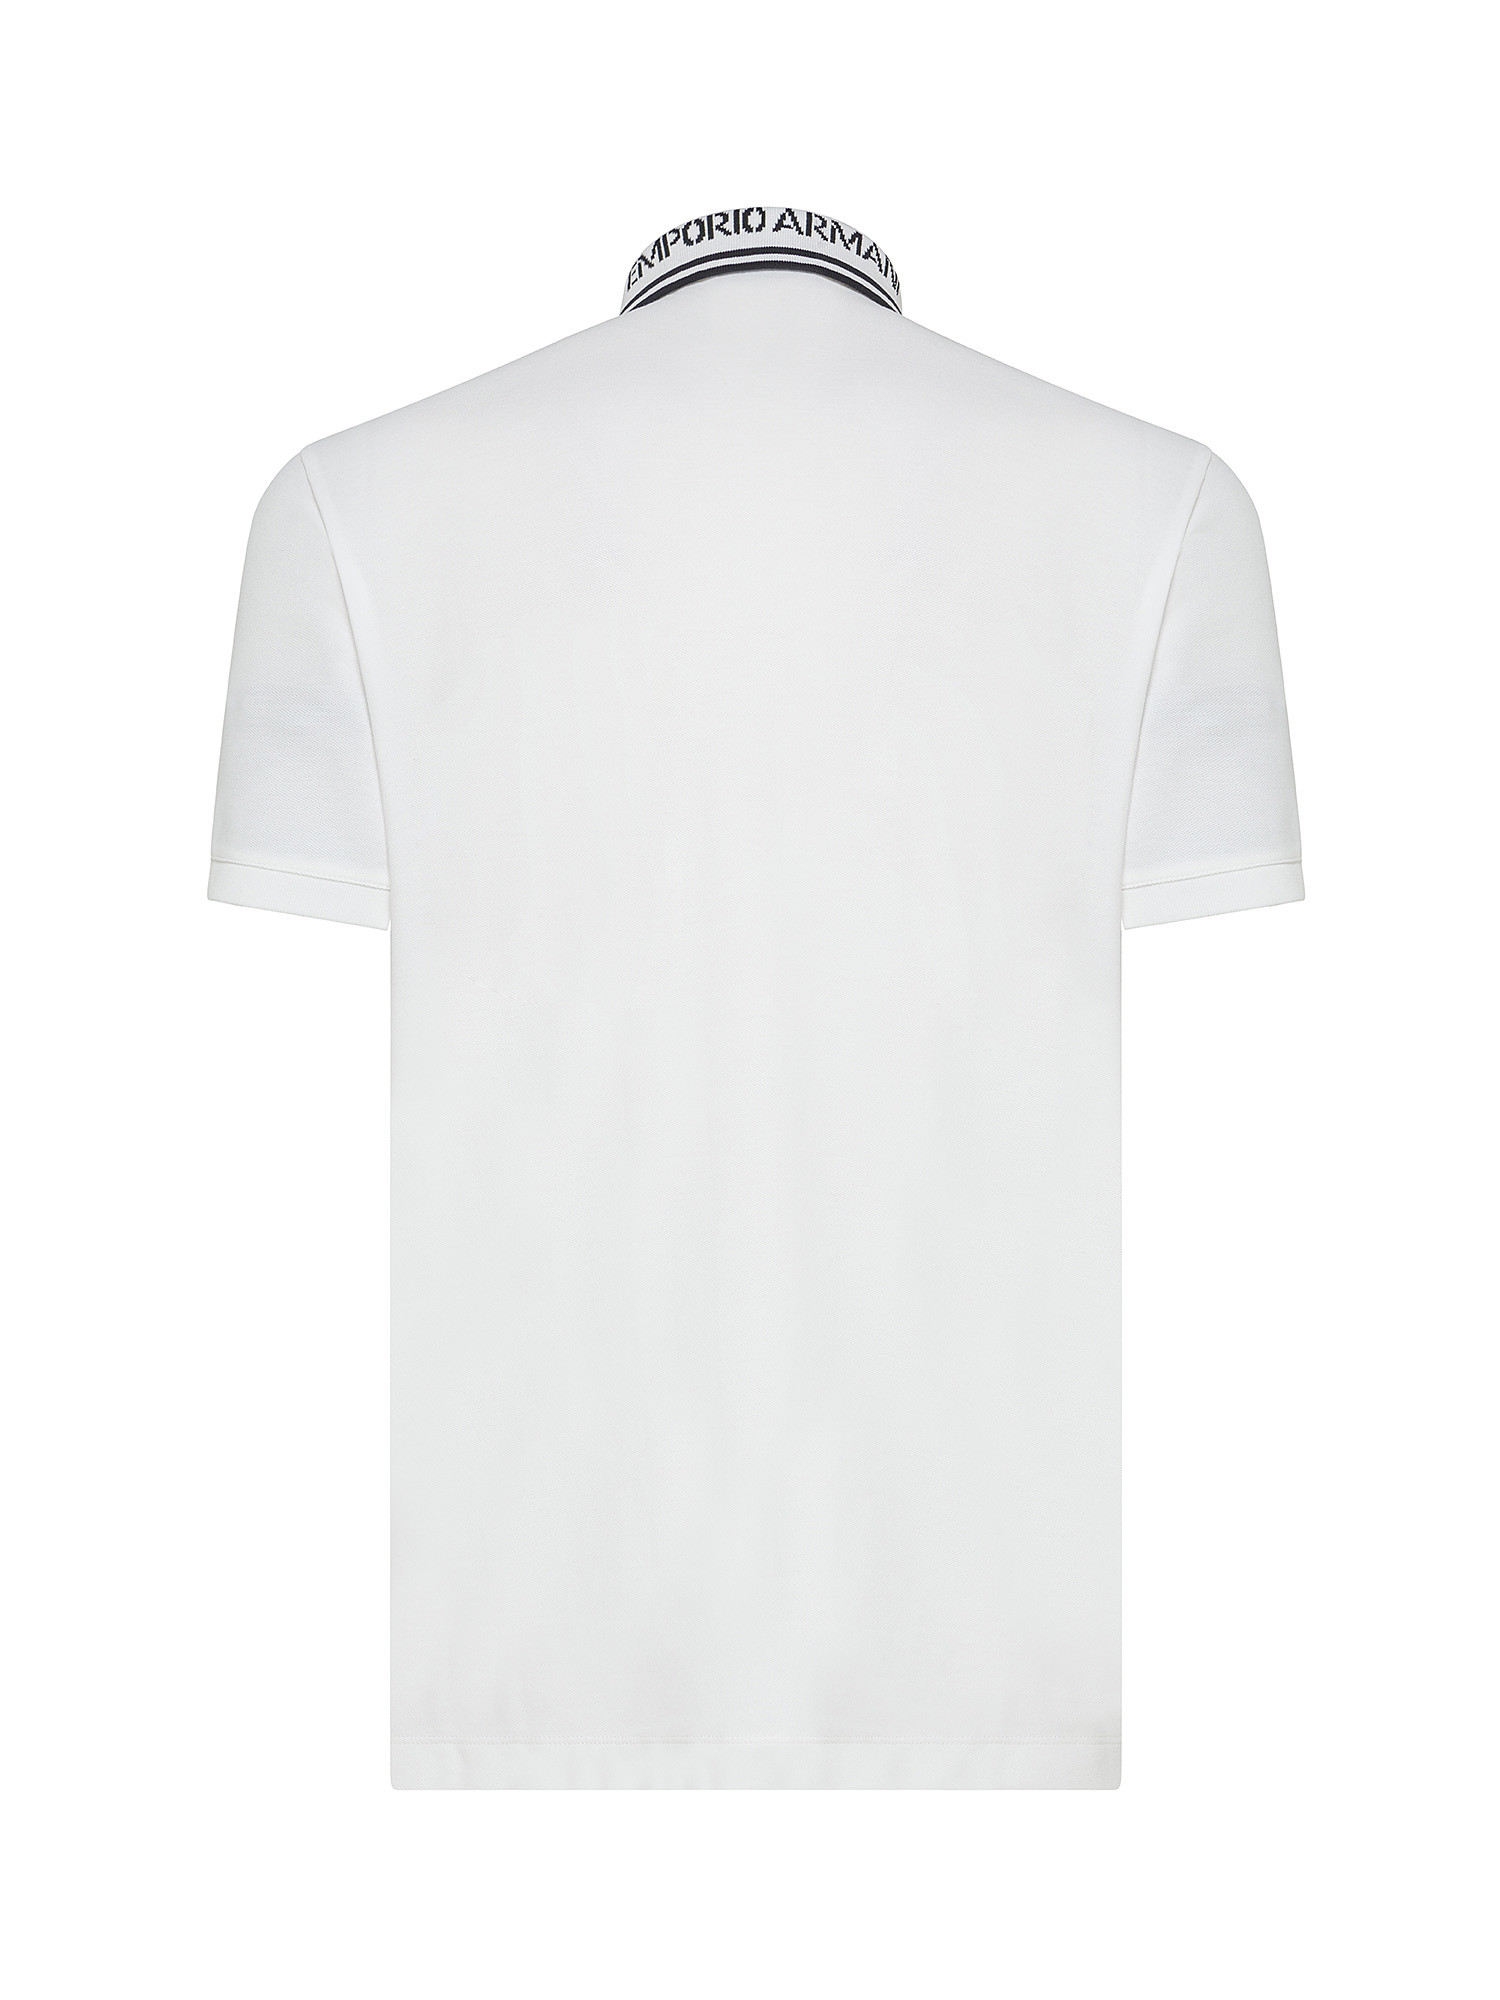 Emporio Armani - Cotton polo shirt with embroidered logo, White, large image number 1